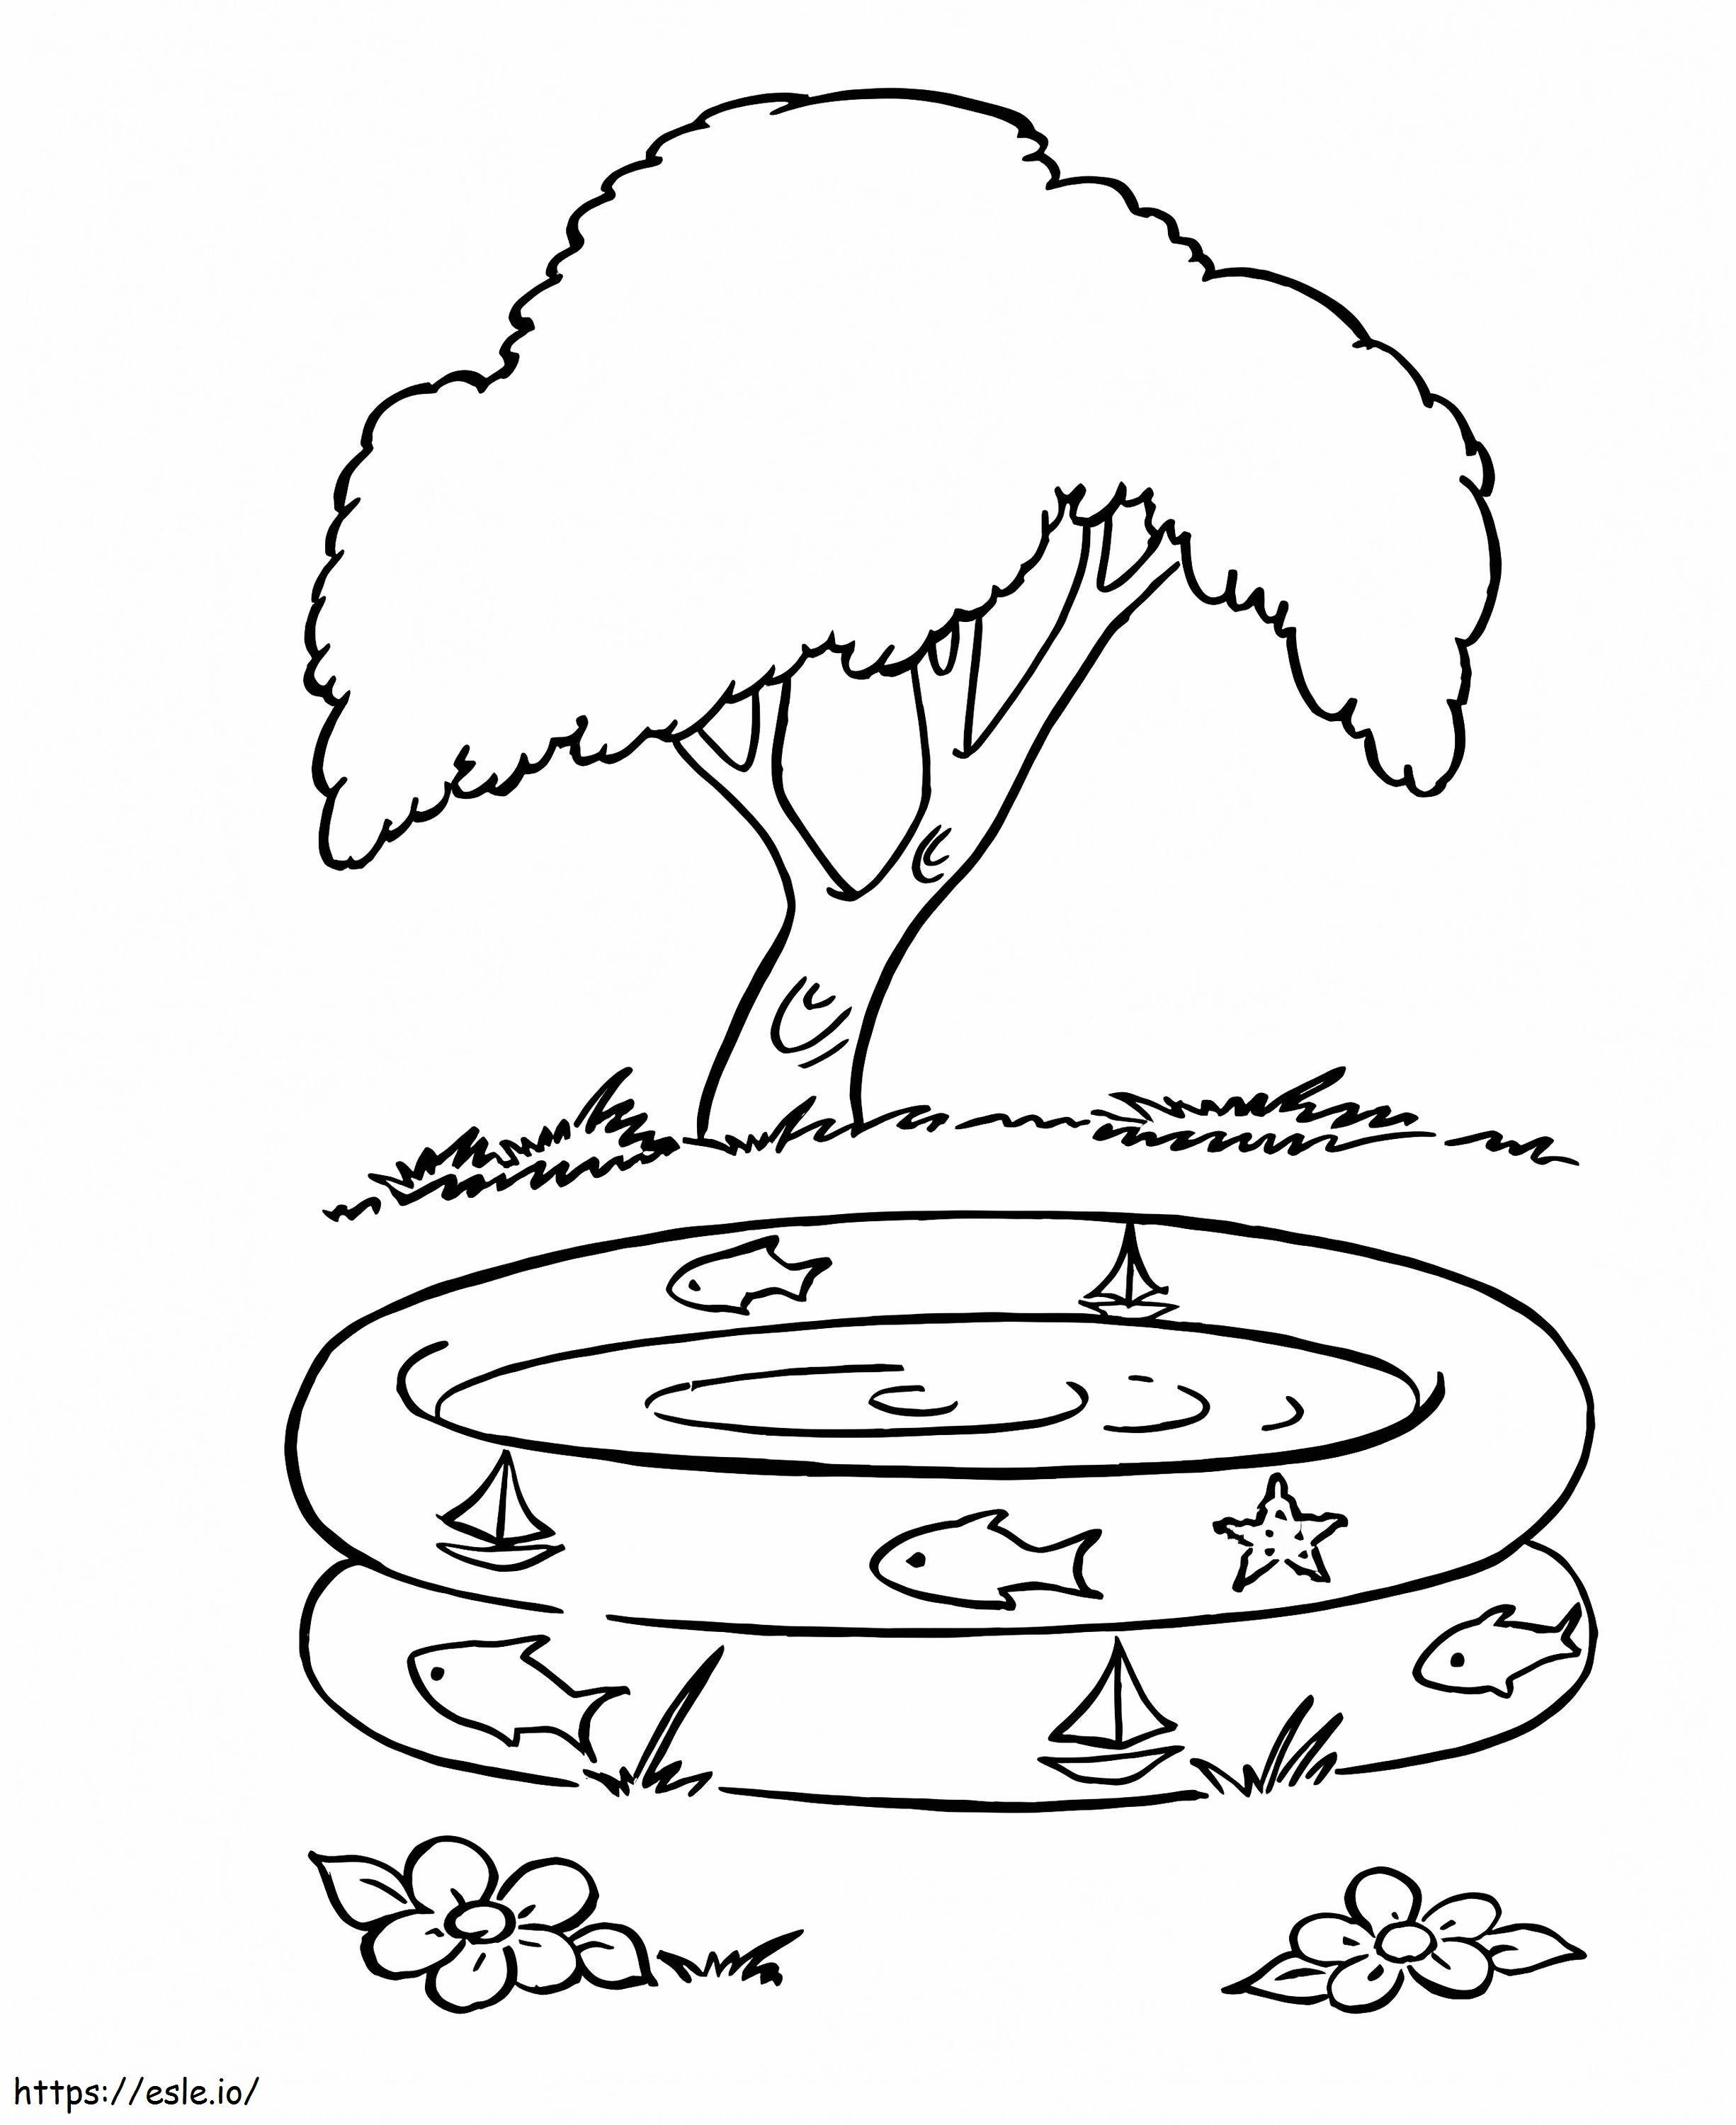 Small Pool And Tree coloring page